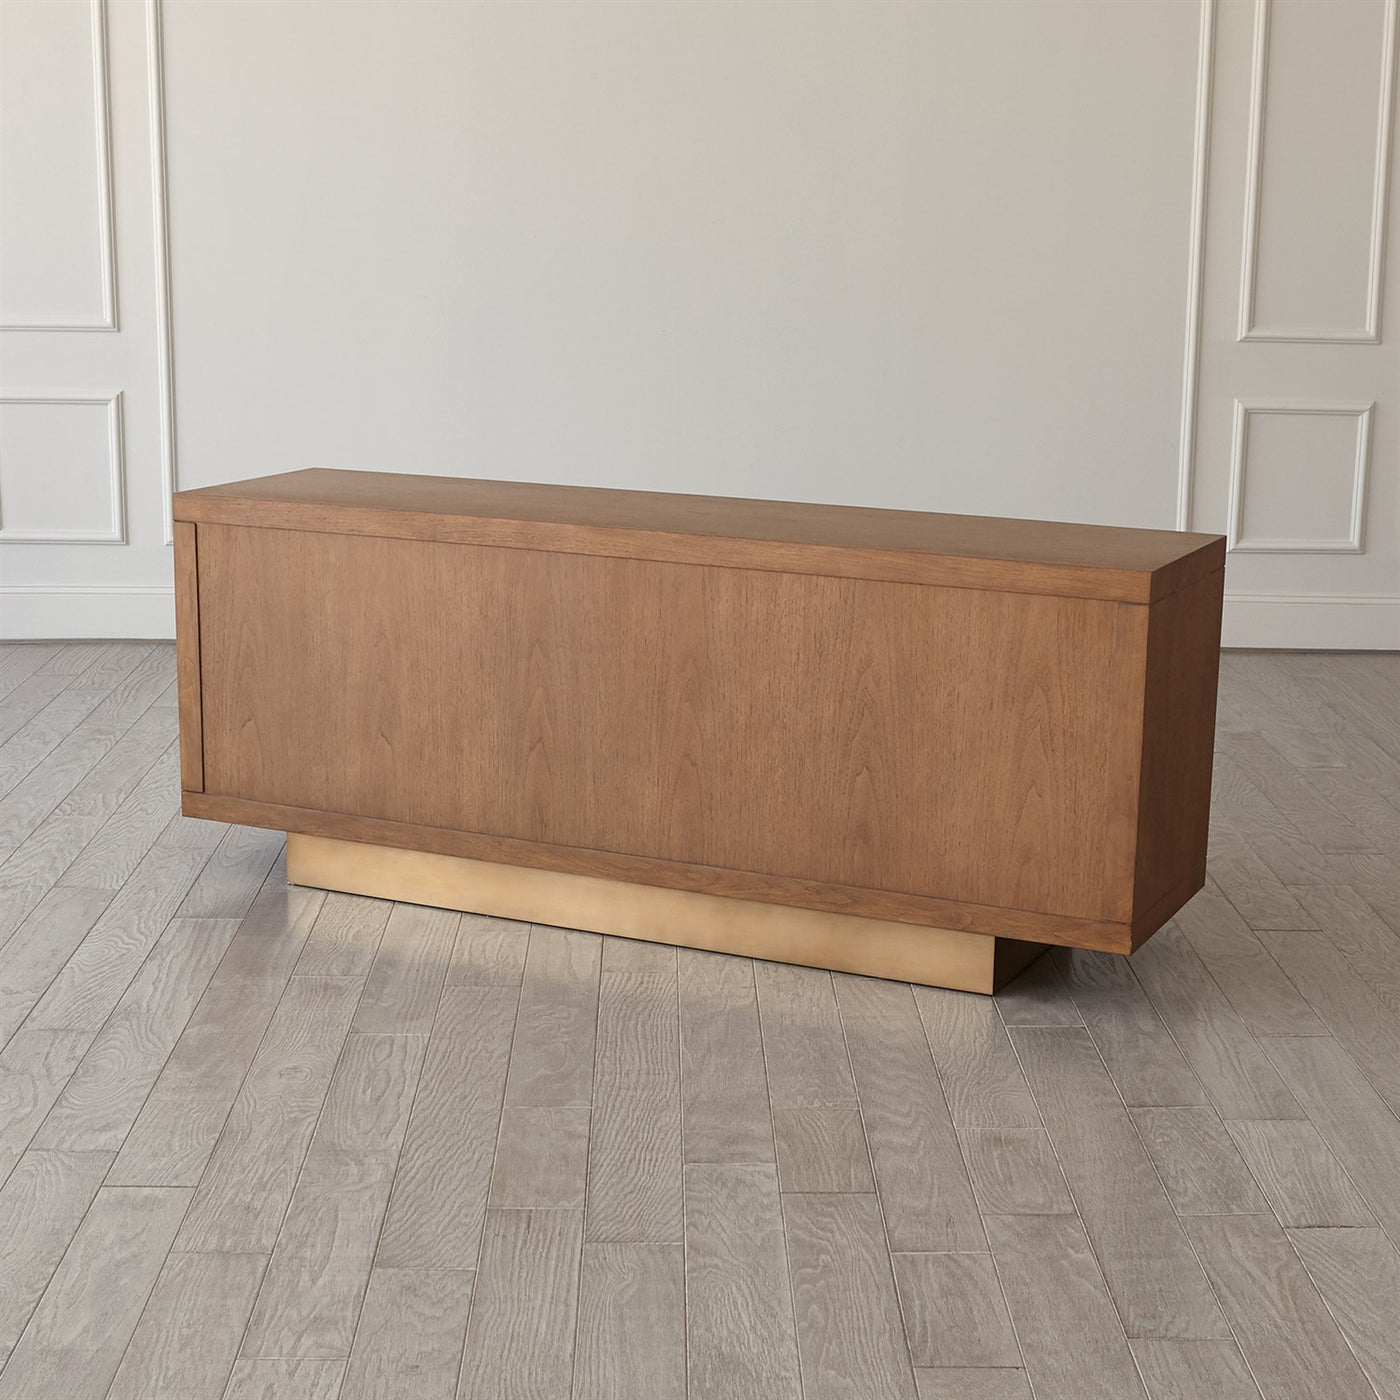 LATITUDES MEDIA CONSOLE by Global Views